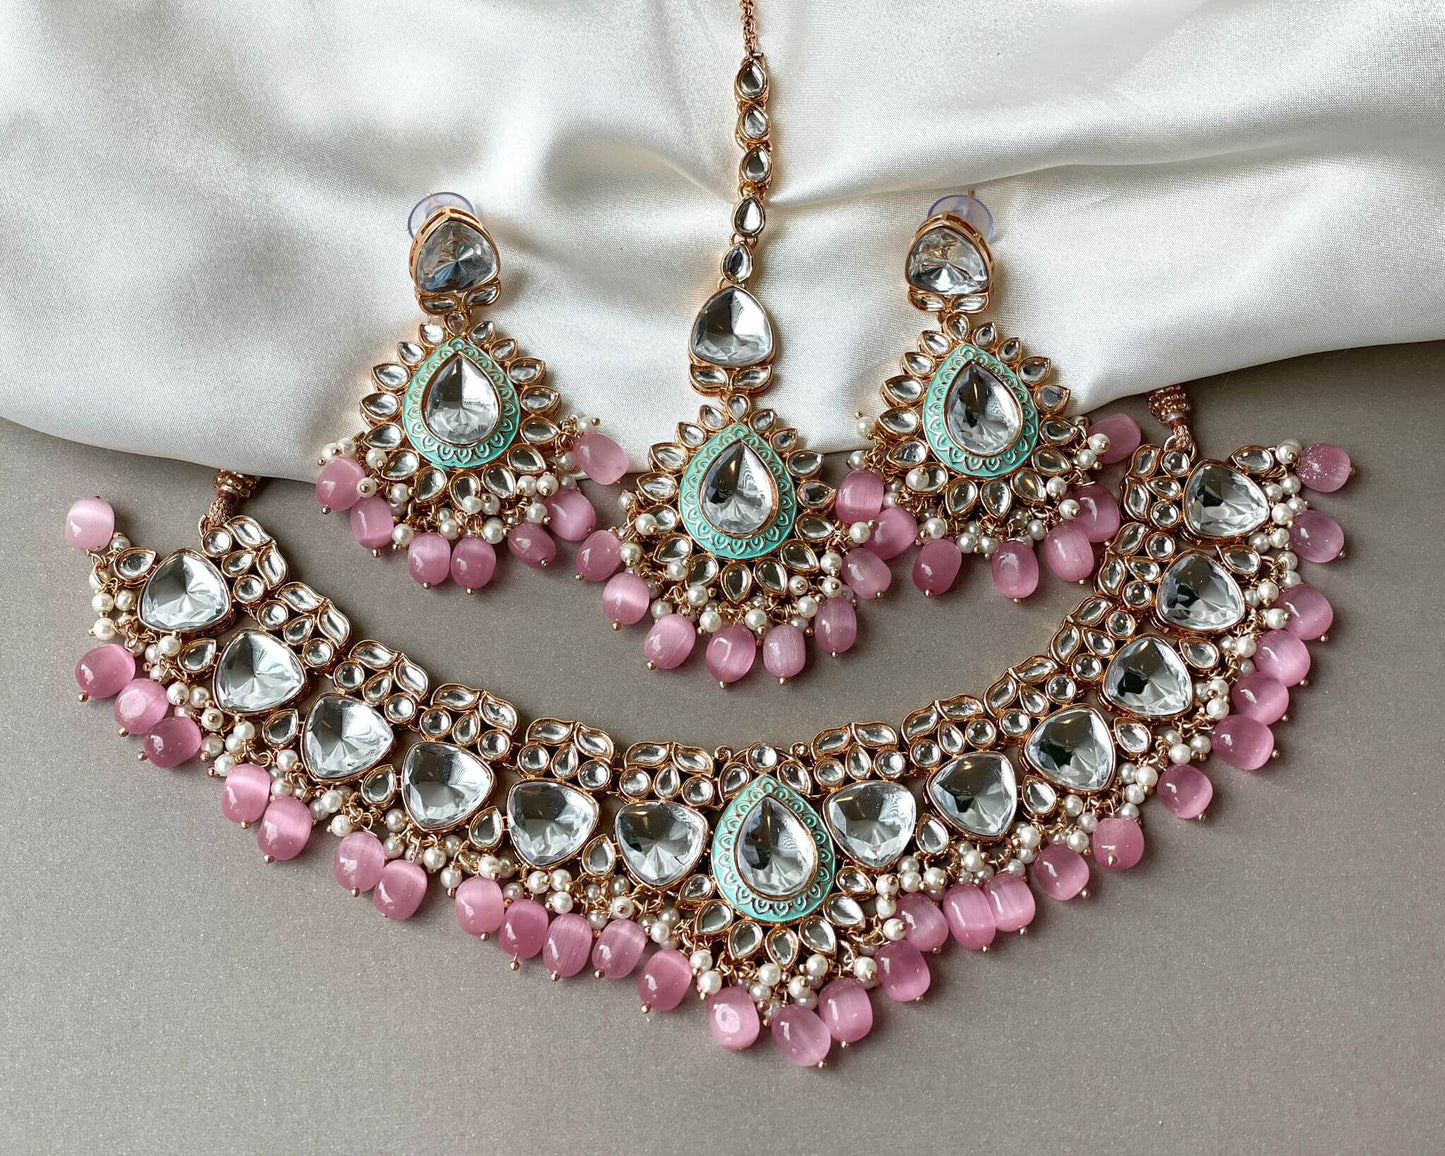 Elegant Meenakari Necklace and Earrings in Pink and Green